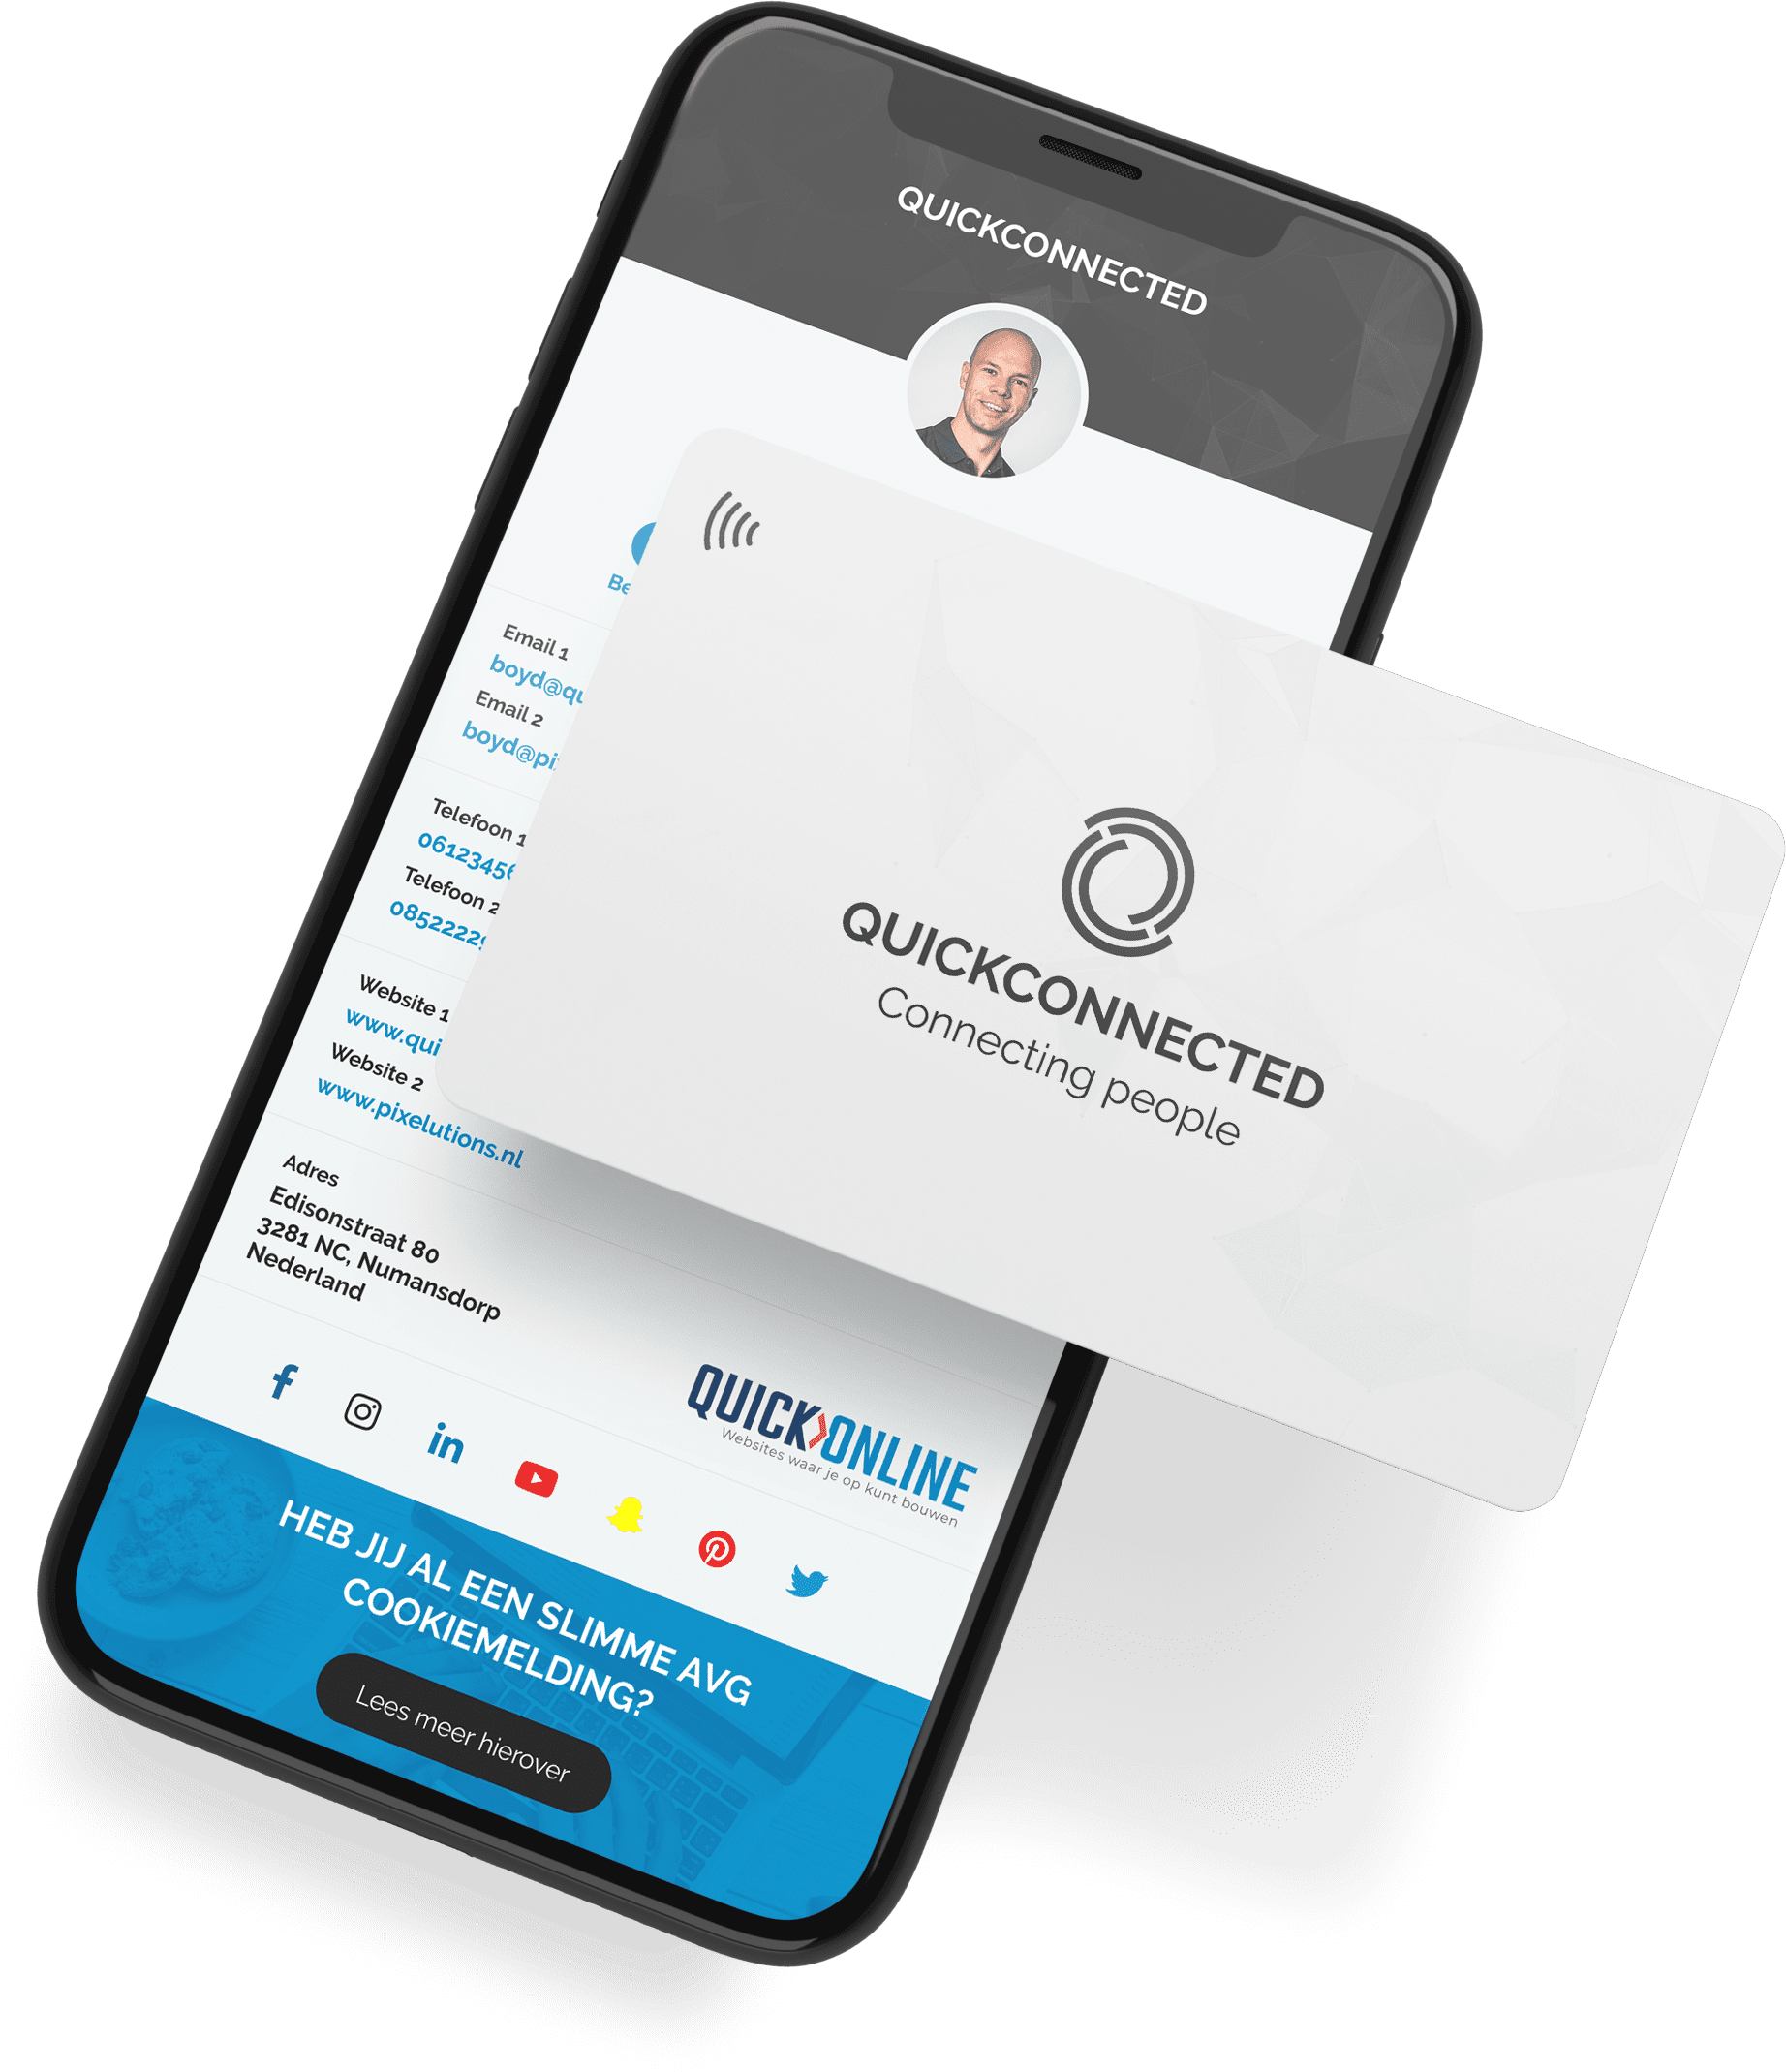 QuickConnected business card nfc